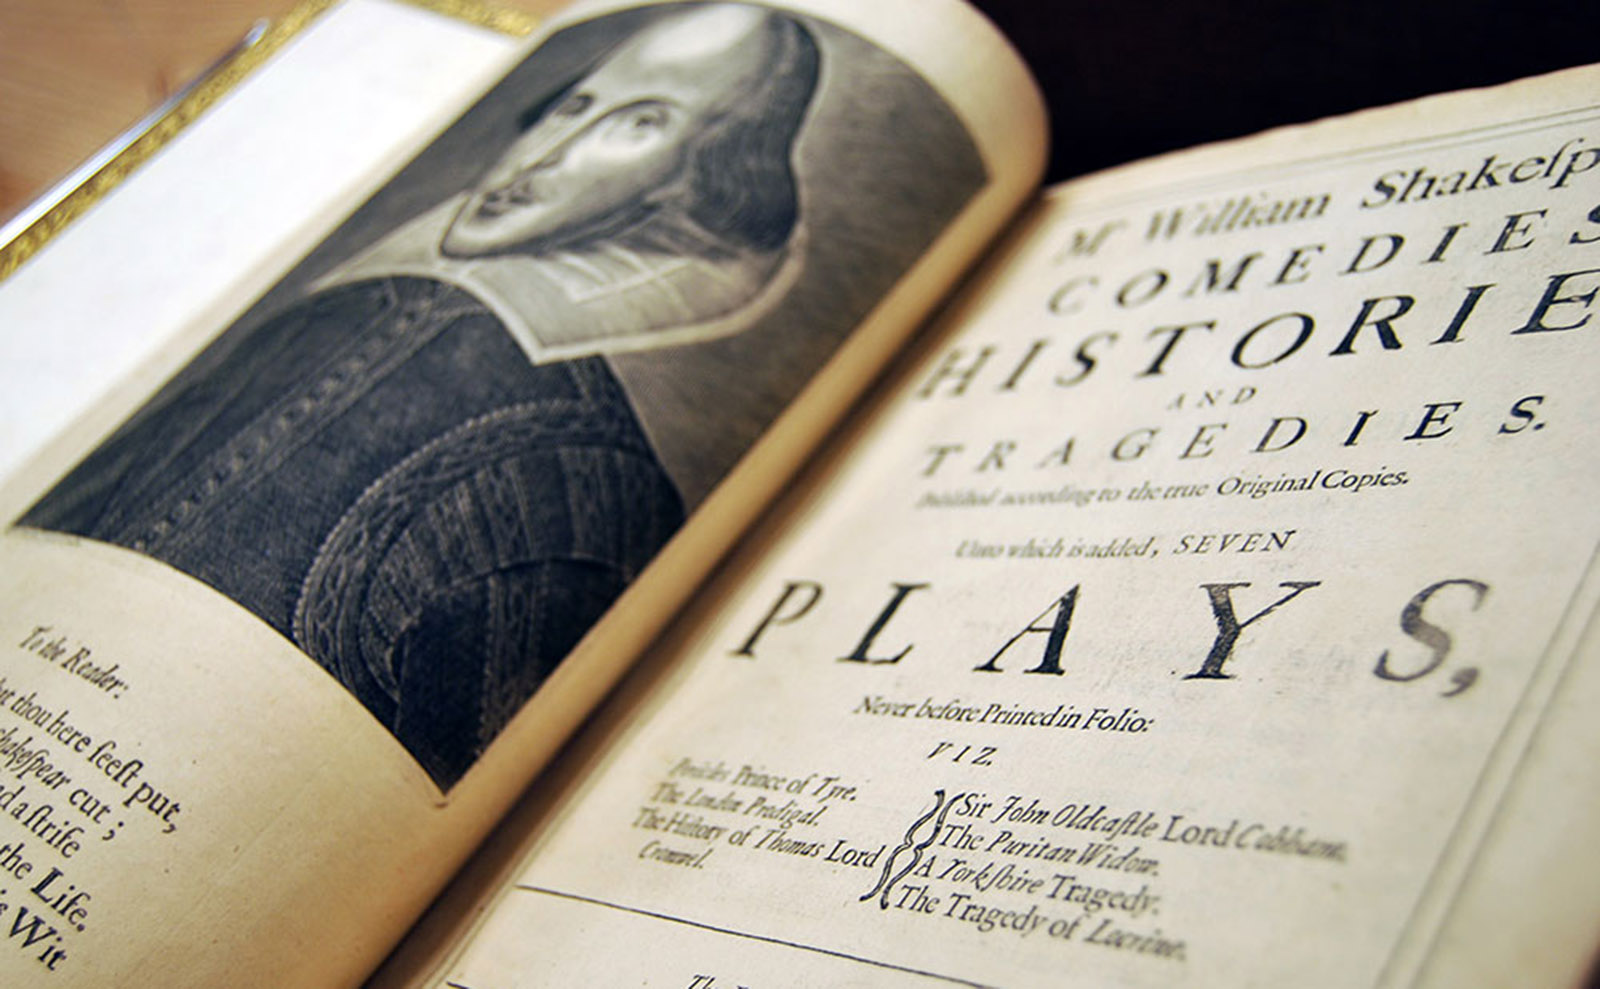 black and white image of title page of shakespeare first folio